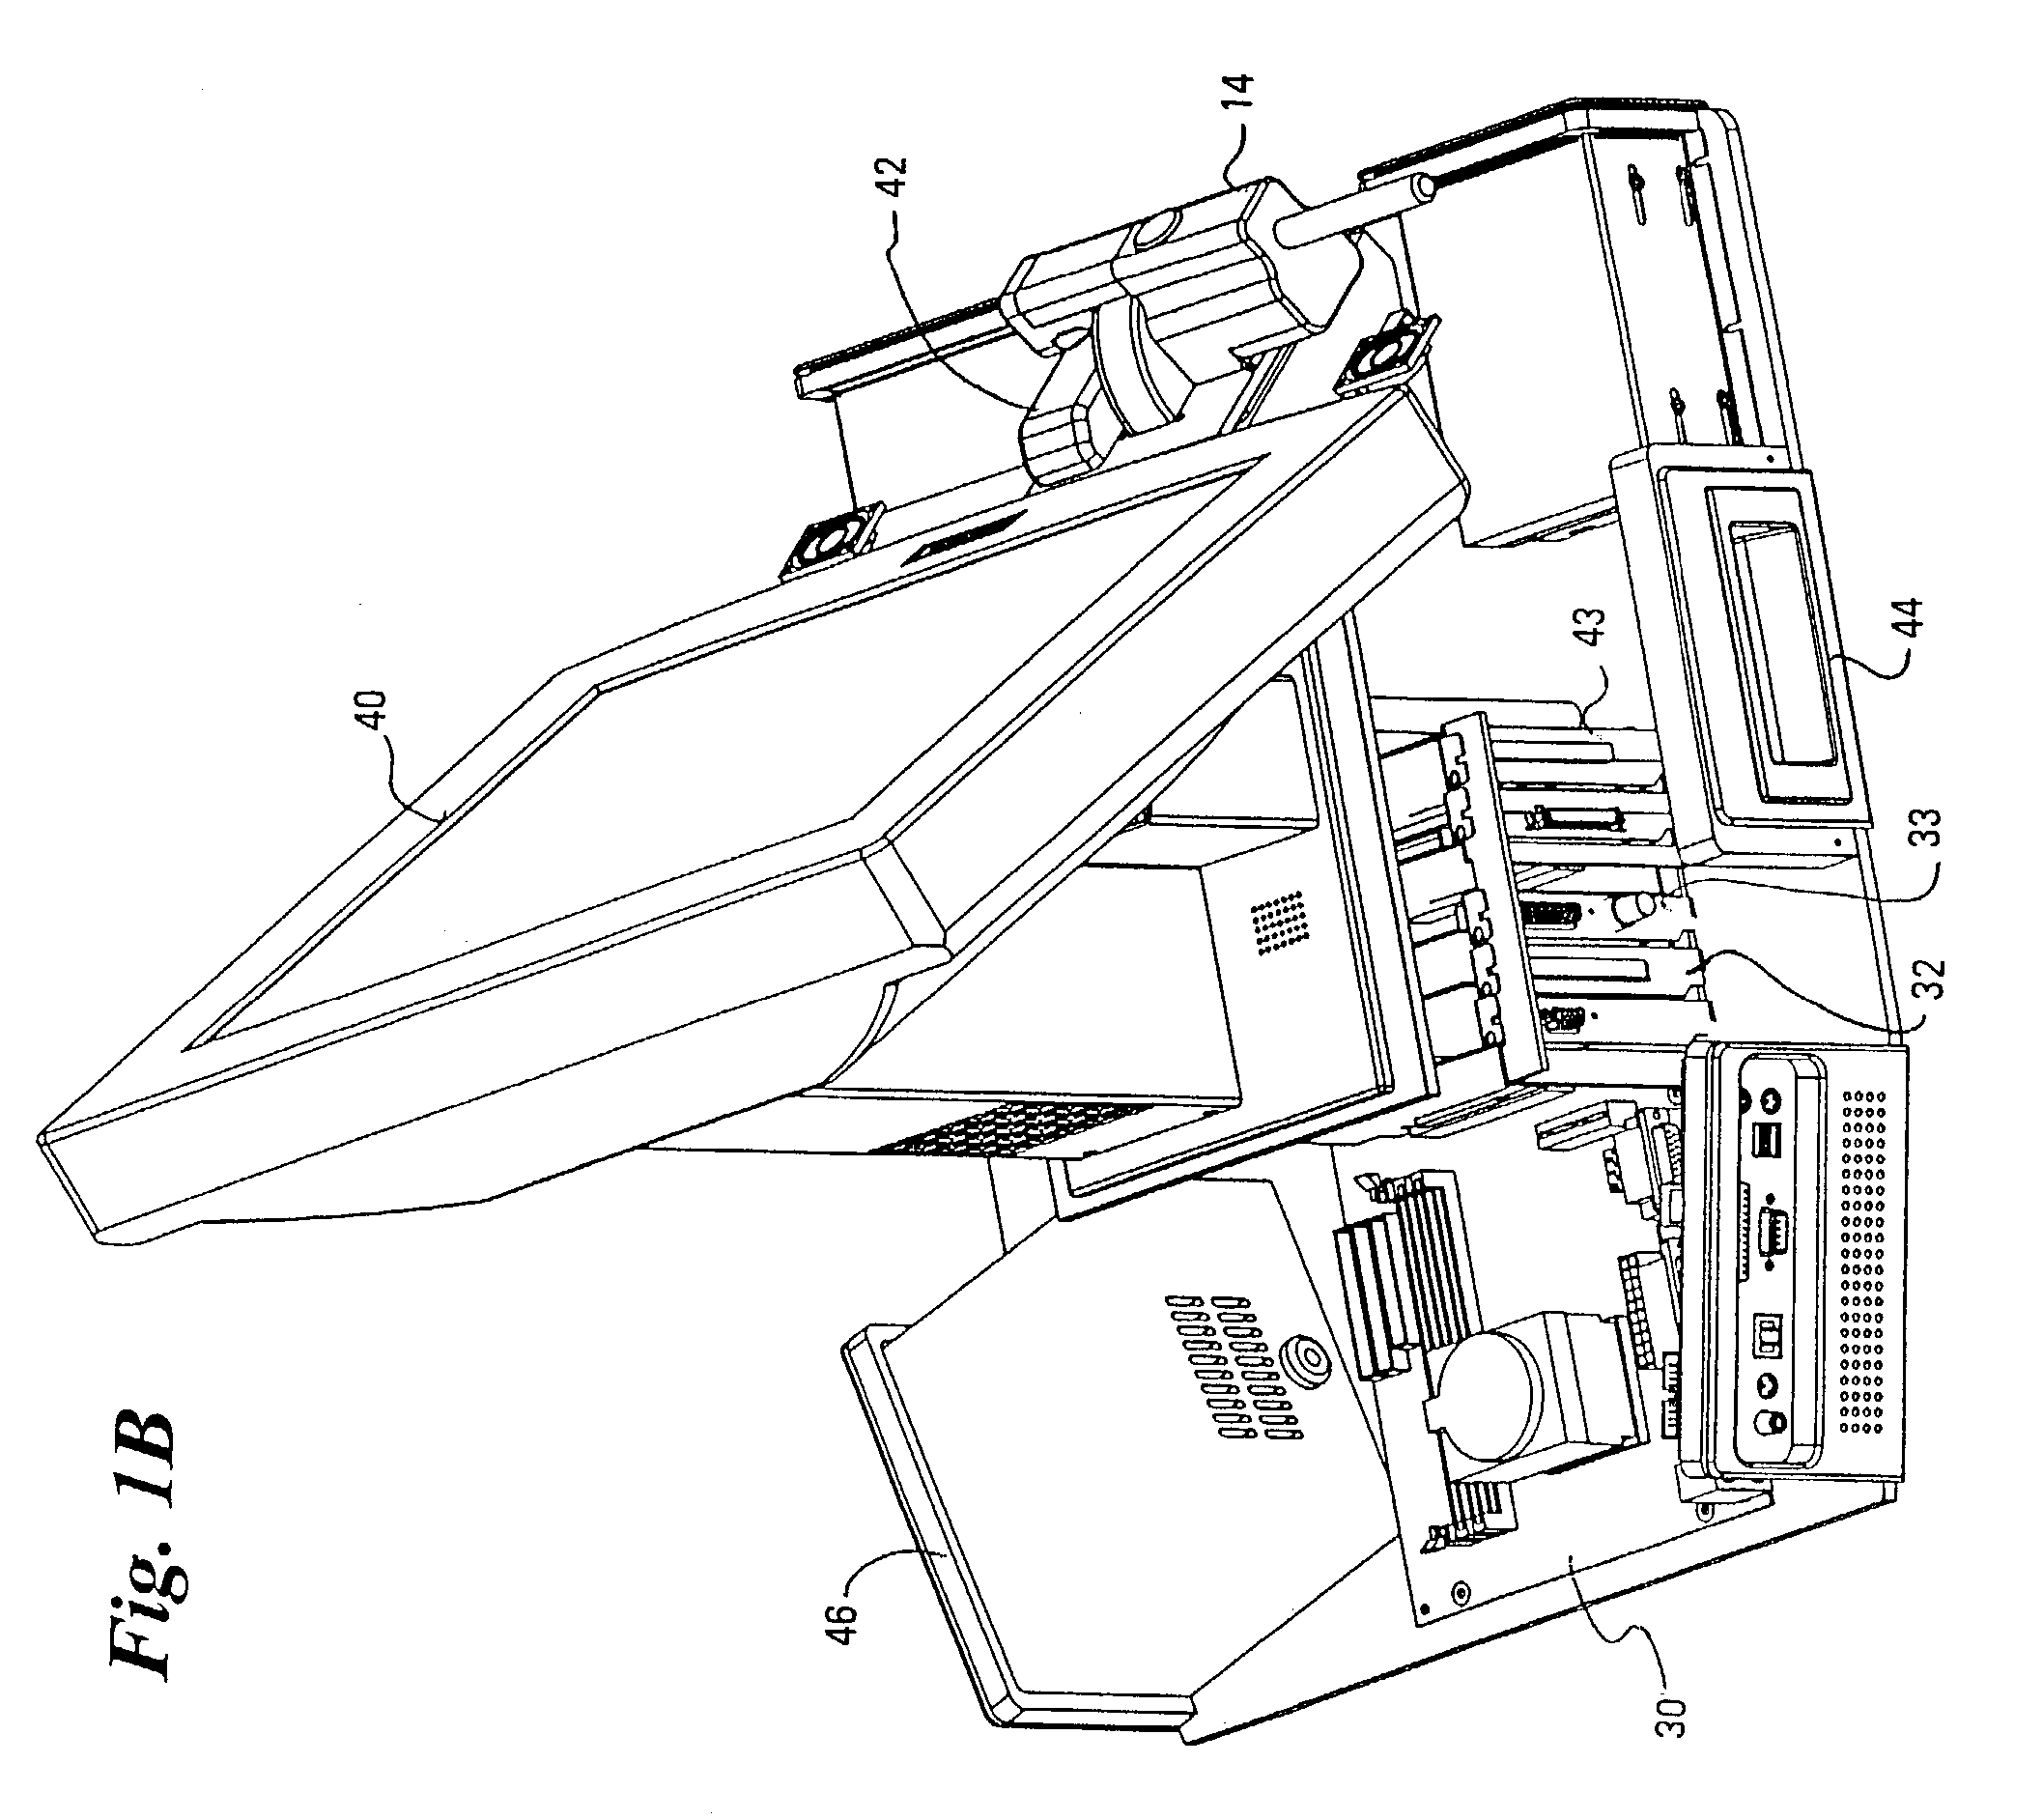 Automated radioisotope seed loader system for implant needles